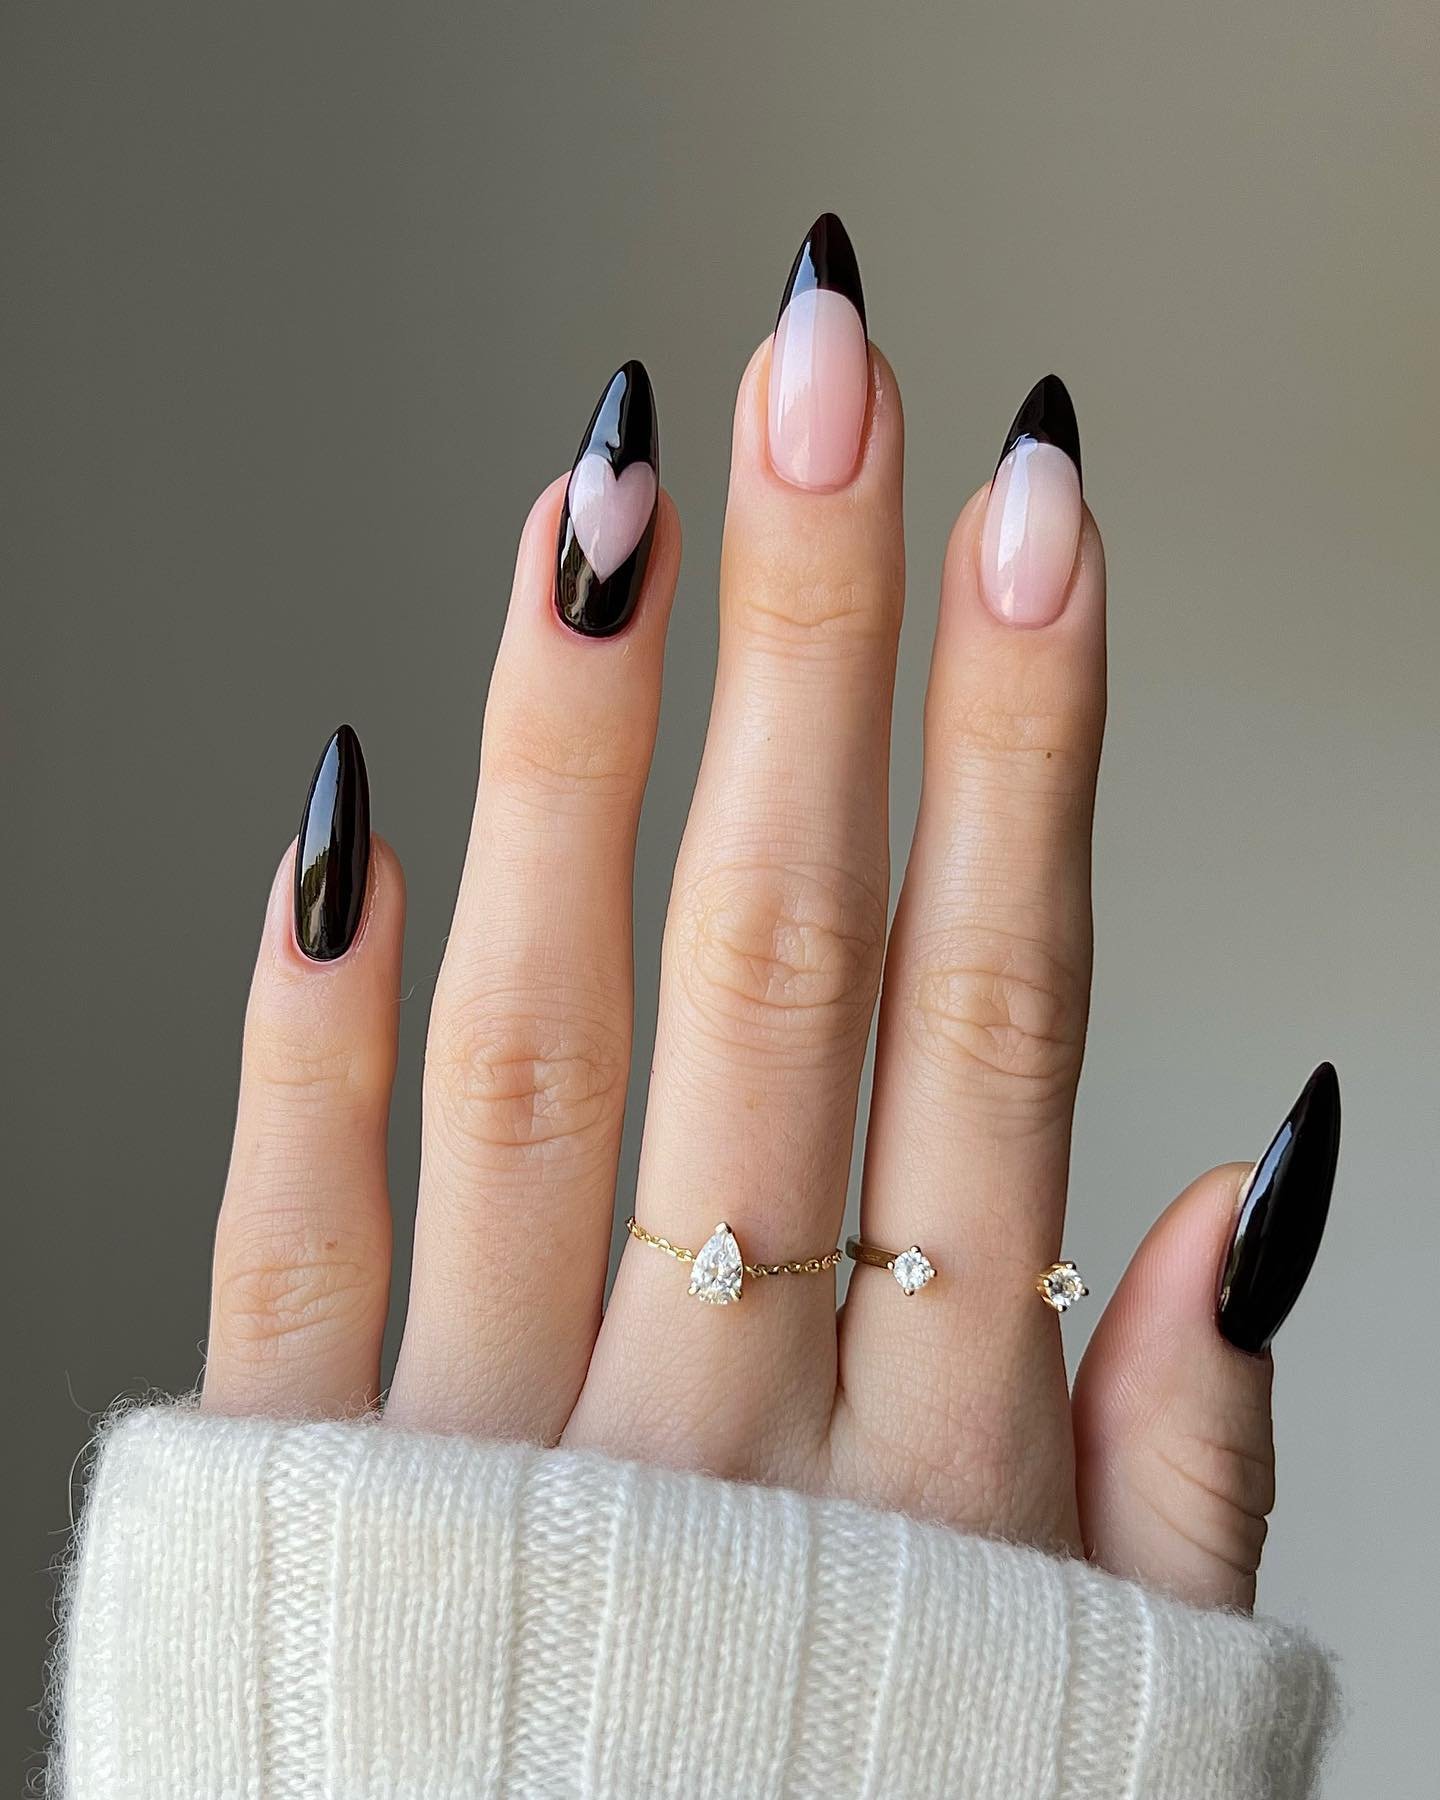 30 - Picture of Black Nails